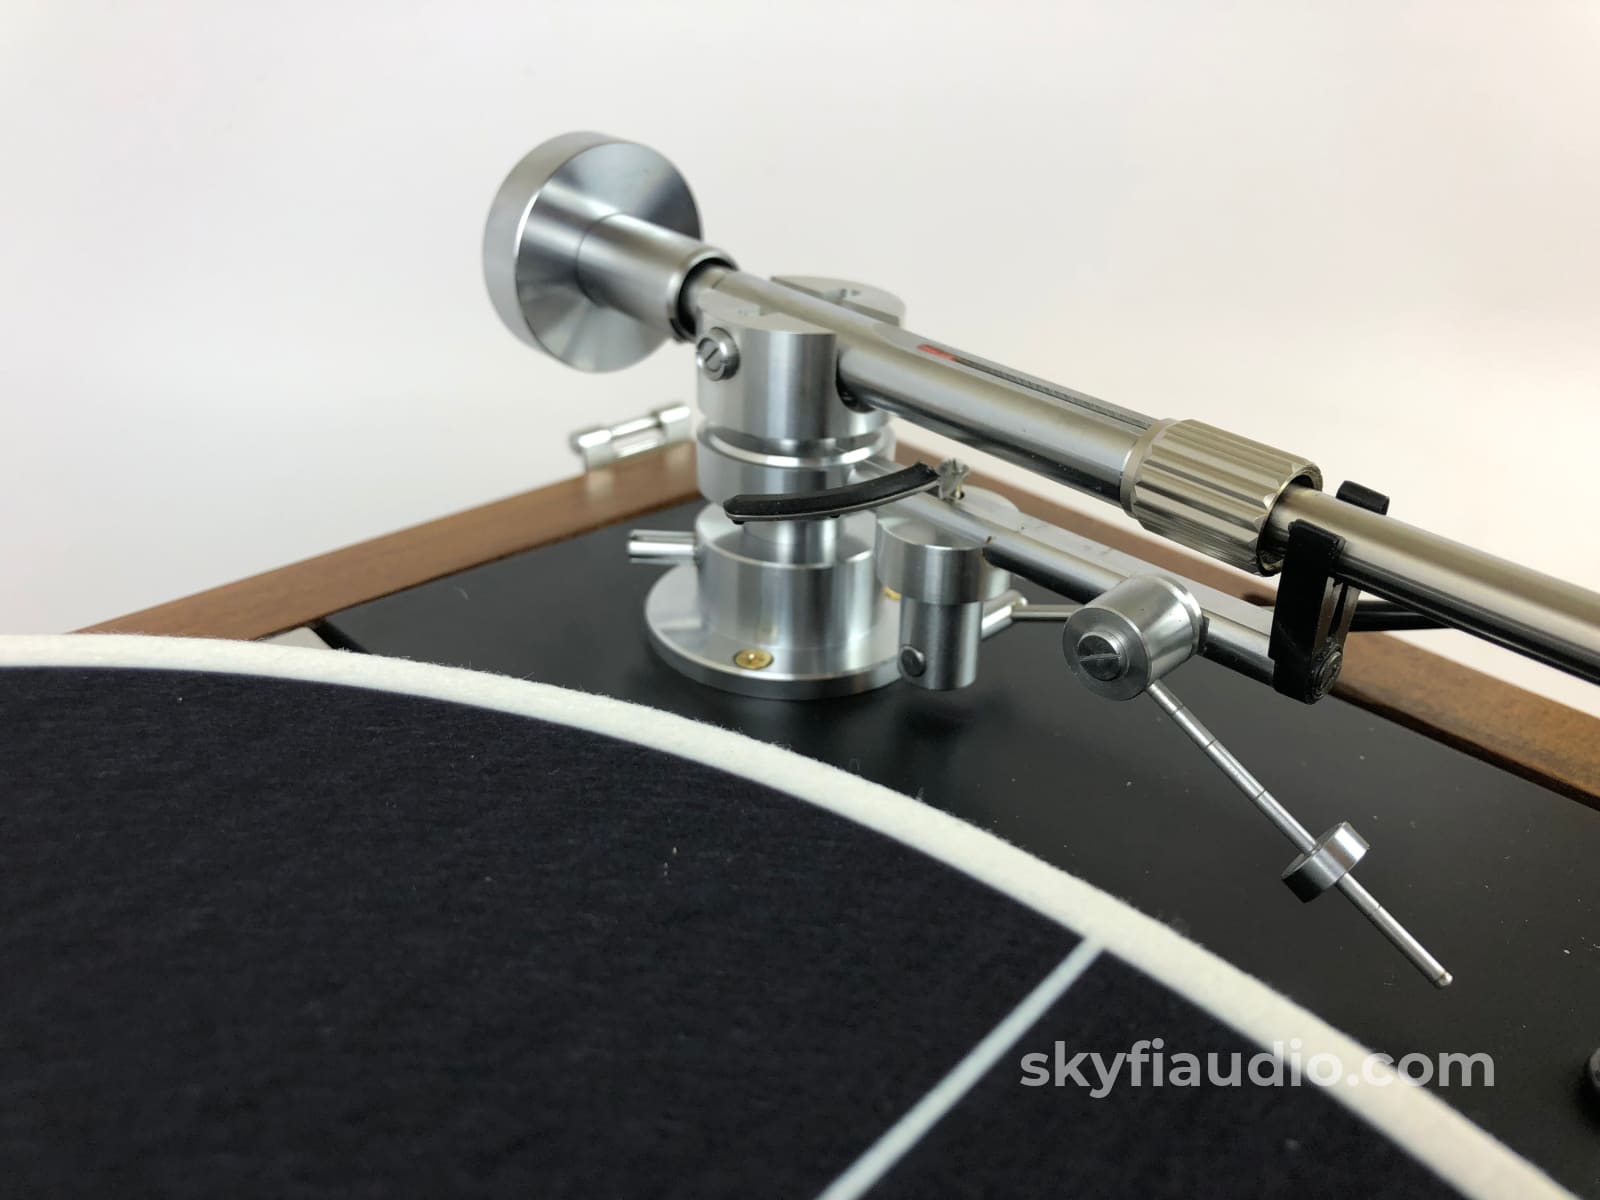 Linn Lp12 Classic Turntable With Luxman Tonearm And New Sumiko Cartridge